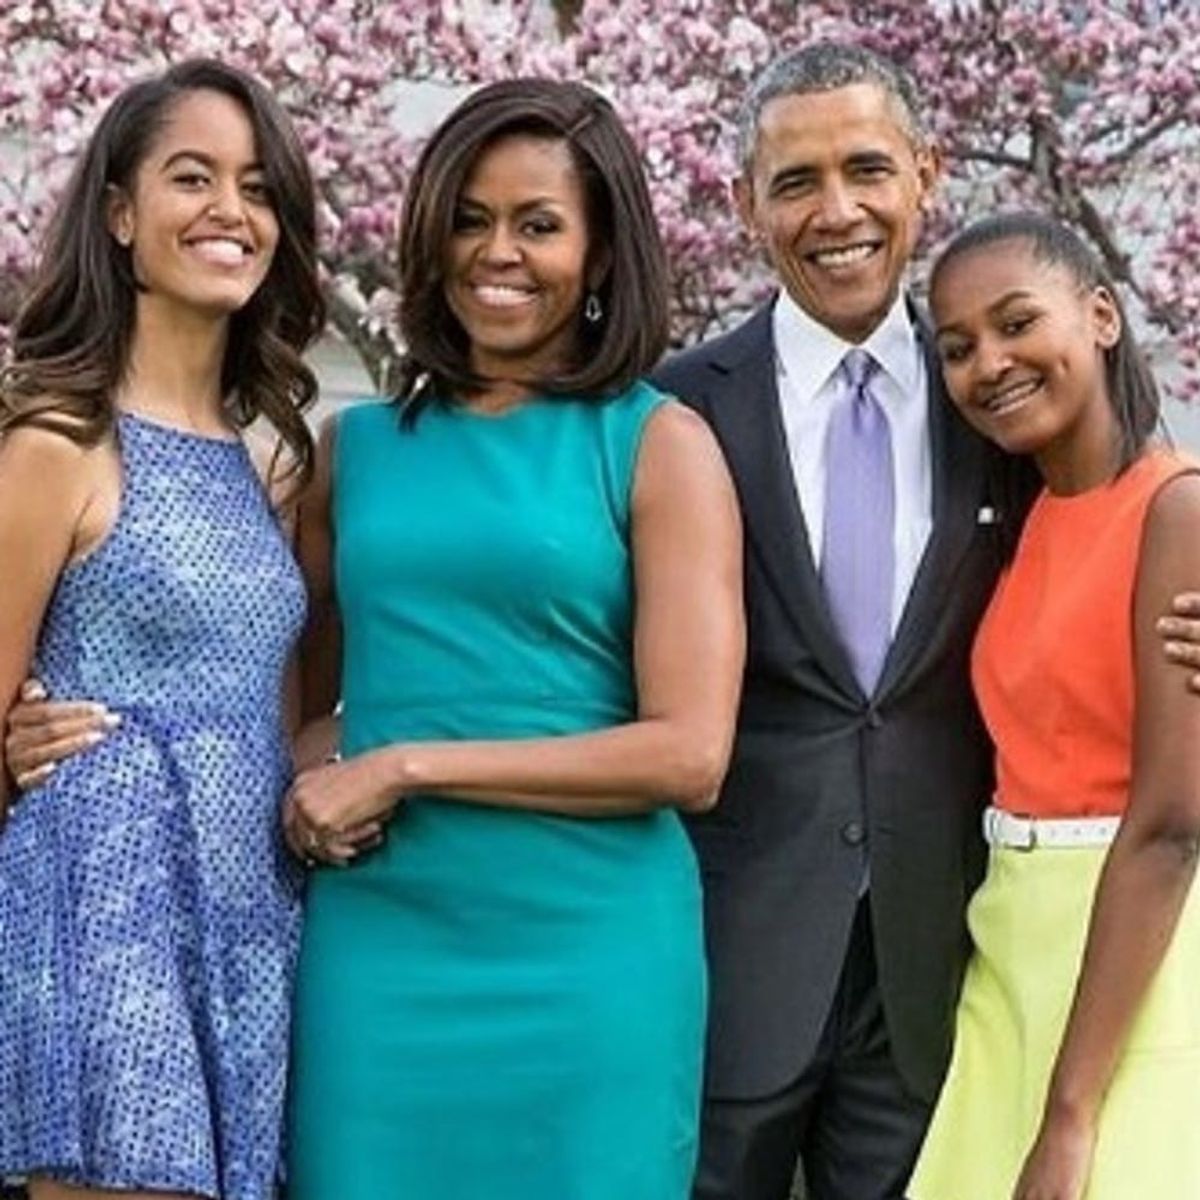 Find Out What President Obama Told Malia and Sasha About the Election